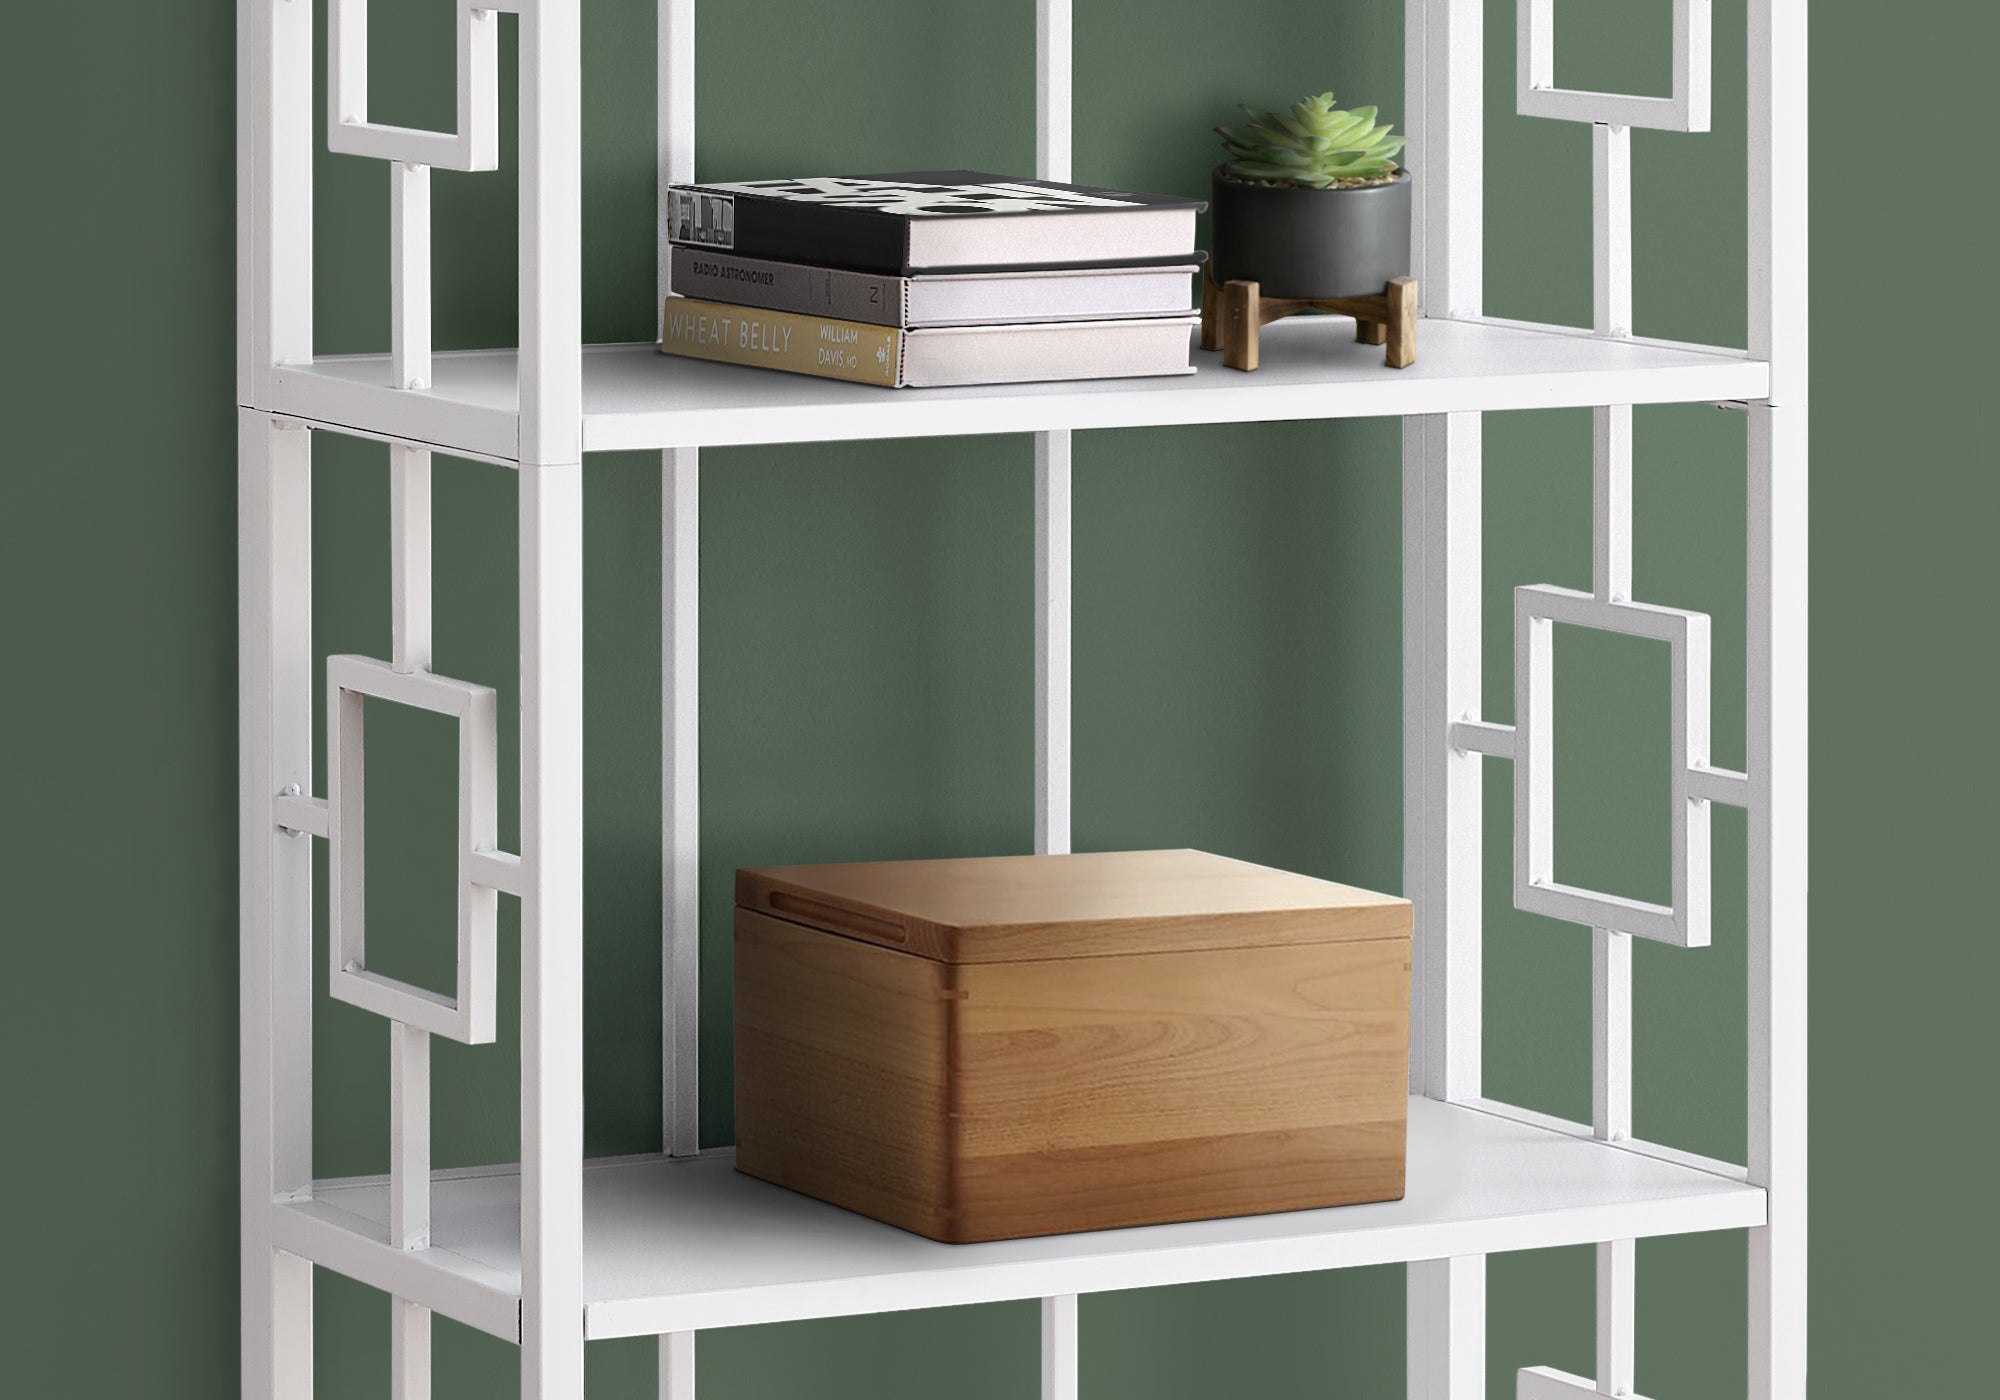 I 3618 - BOOKCASE - 62"H / WHITE / WHITE METAL ETAGERE BY MONARCH SPECIALTIES INC